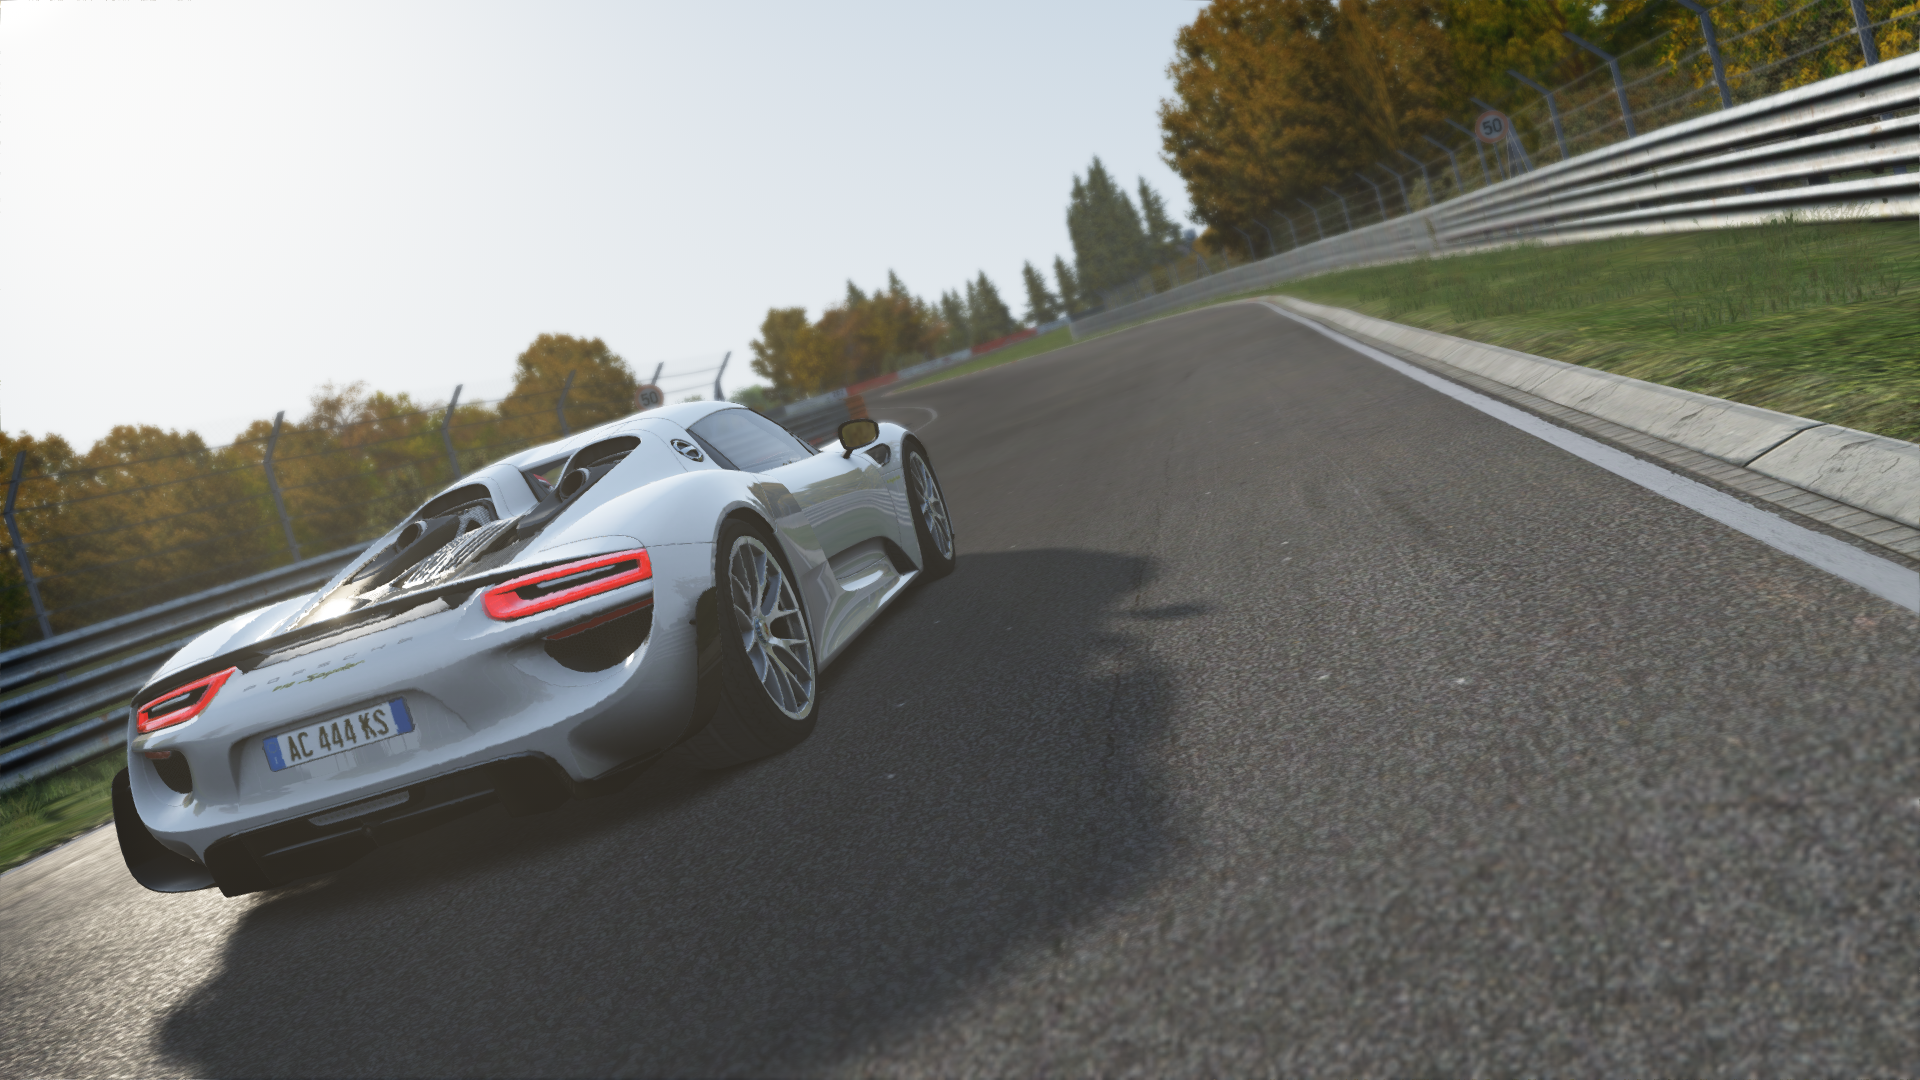 General 1920x1080 Assetto Corsa Porsche 918 Spyder Nurburgring car racing numbers video games PC gaming race tracks silver cars screen shot vehicle